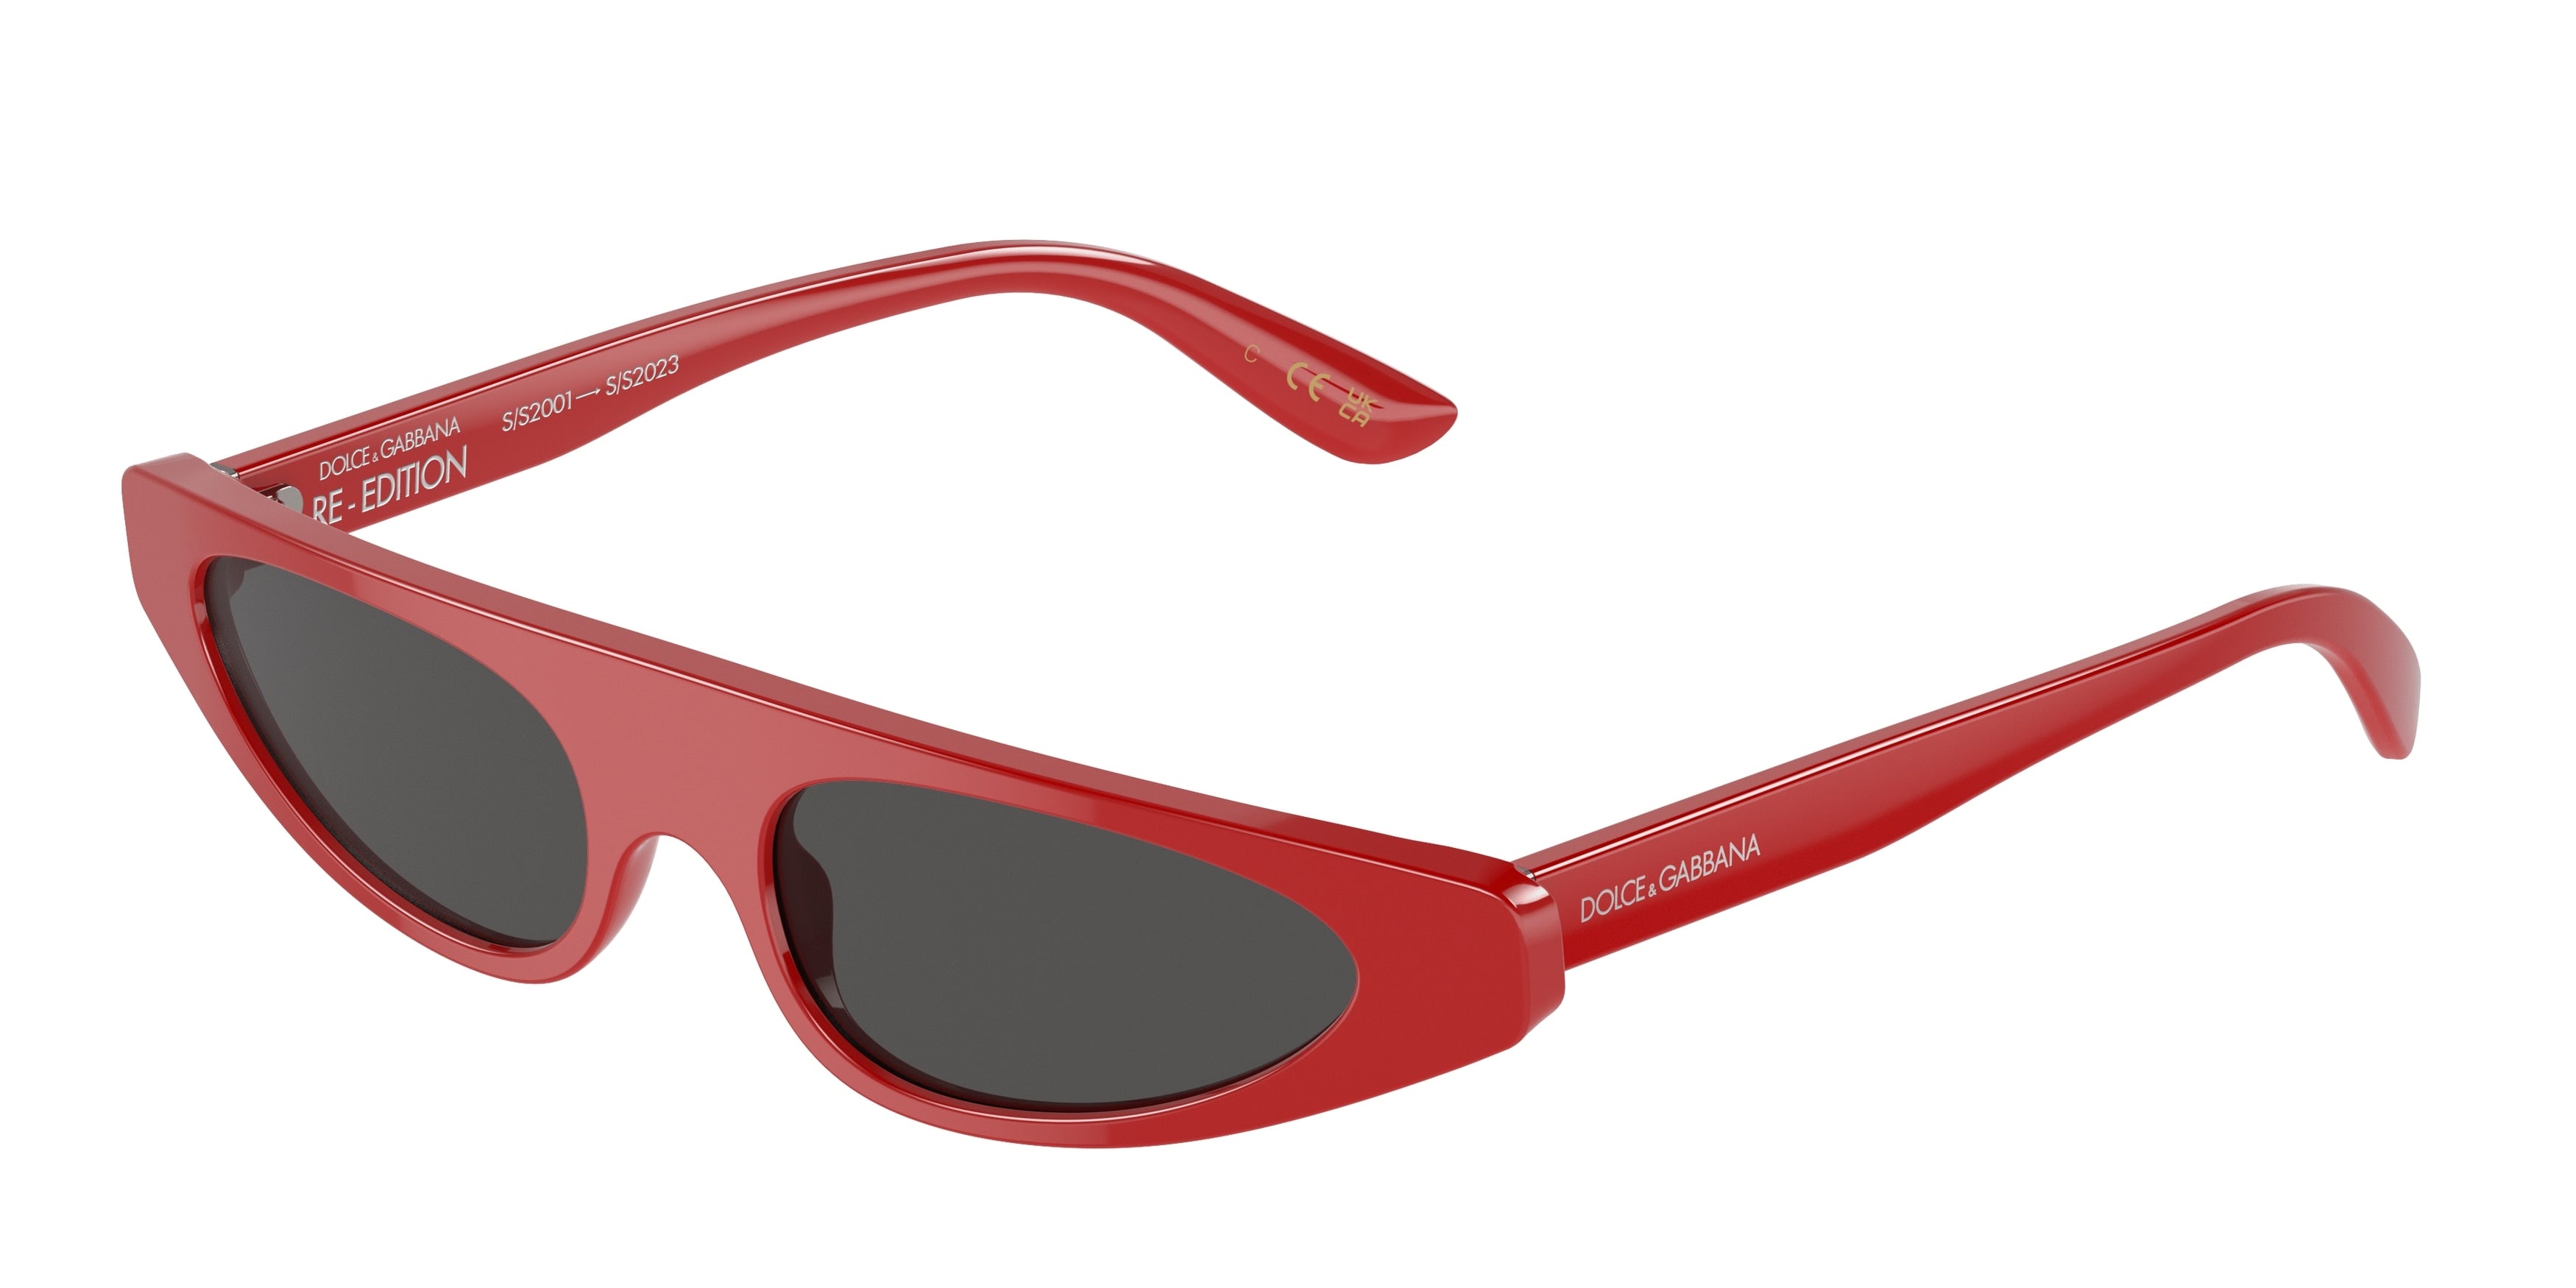 DOLCE & GABBANA DG4442 Rectangle Sunglasses  308887-Red 51-140-17 - Color Map Red